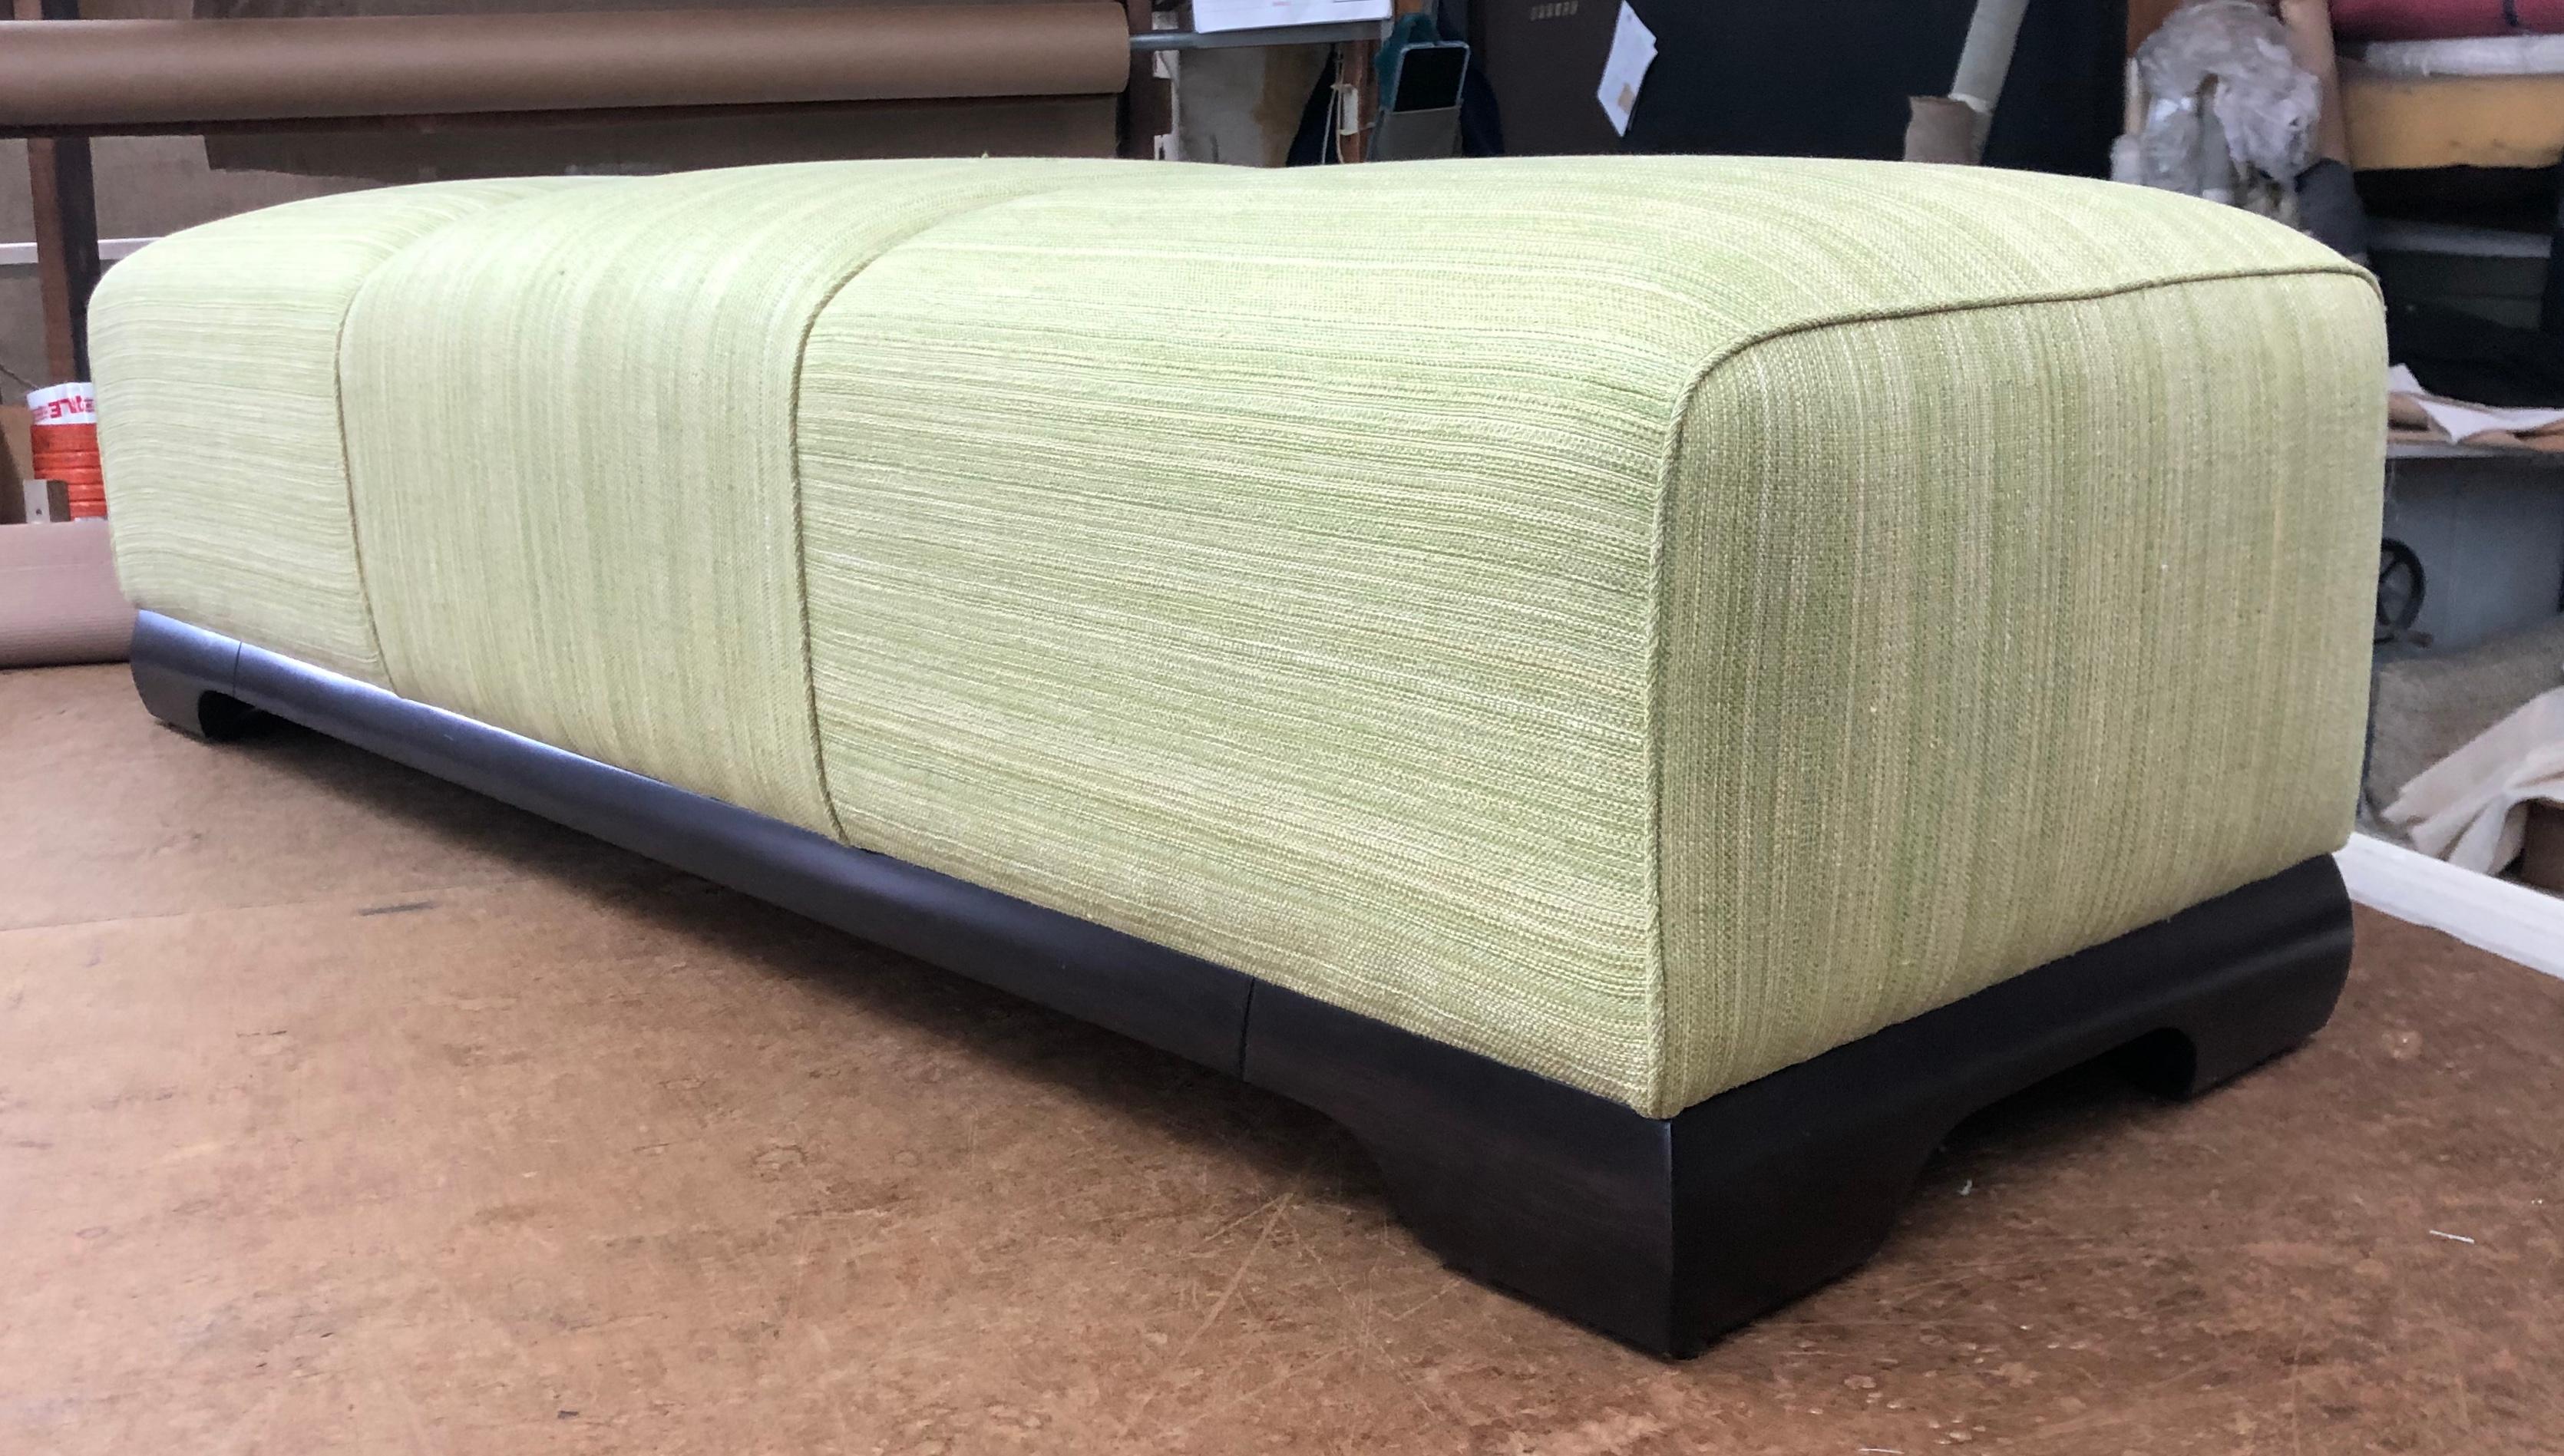 Artfully detailed bench in an apple green and white striae fabric on a dark walnut base.